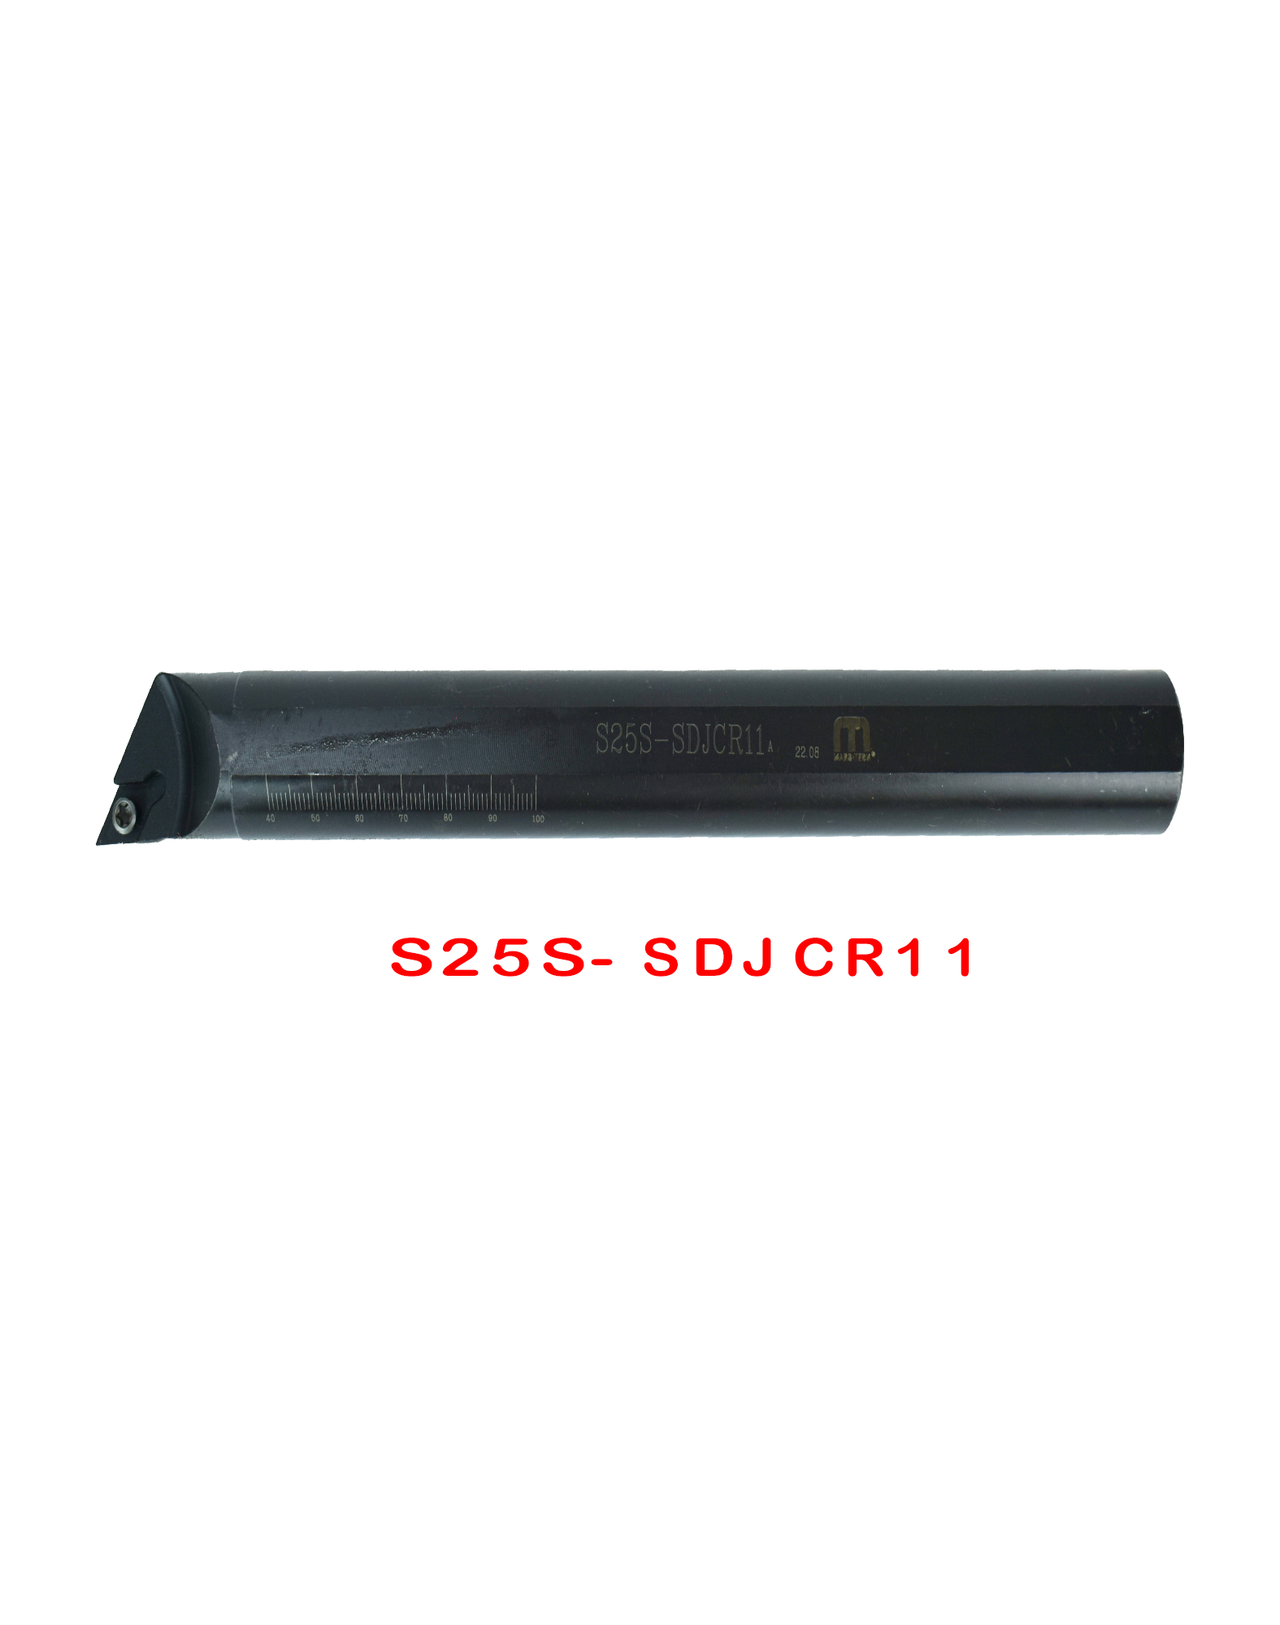 SDJCL/R Boring bar suitable to Dcmt0702/Dcmt11t3 pack of 1